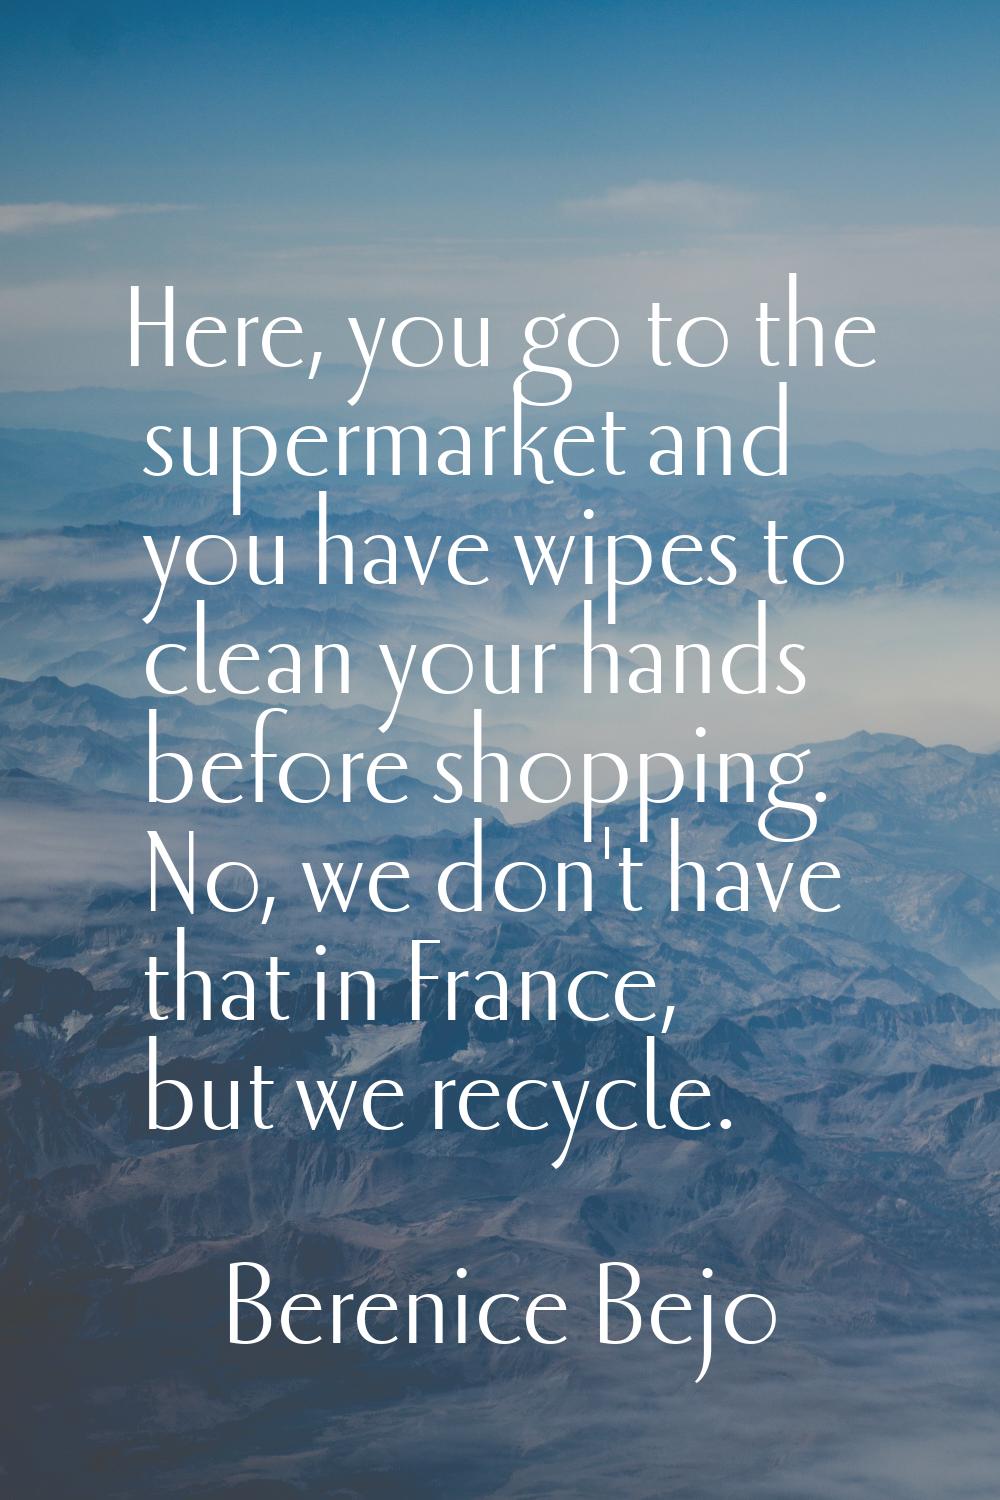 Here, you go to the supermarket and you have wipes to clean your hands before shopping. No, we don'